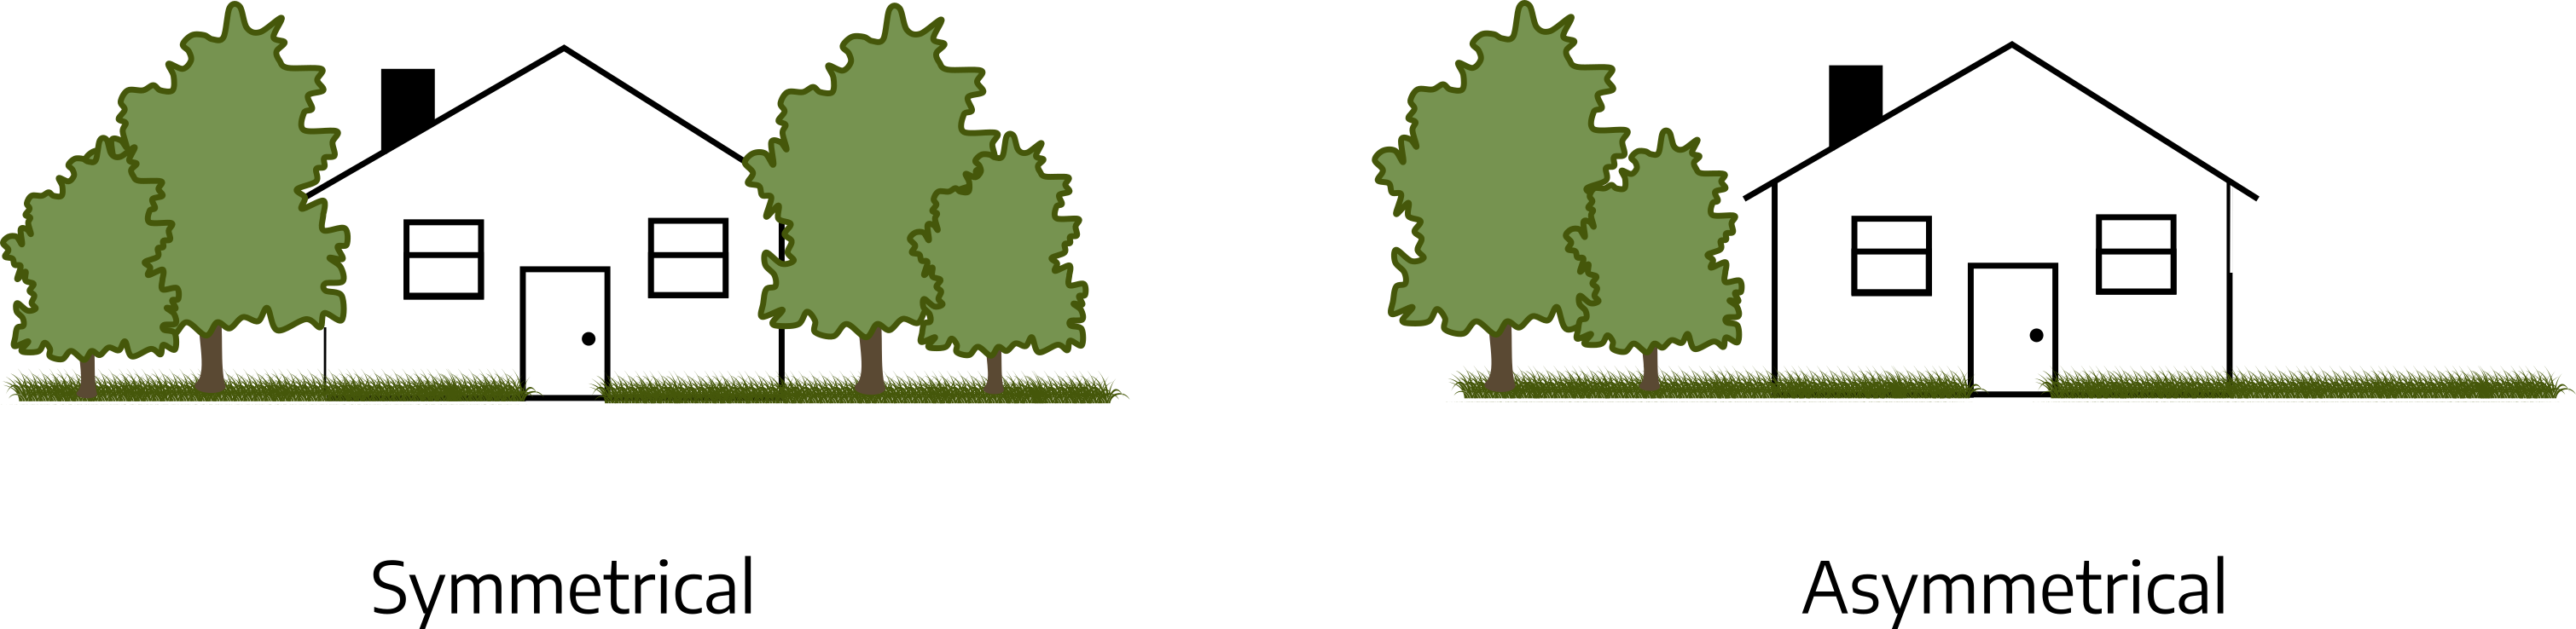 Two cartoon drawings. The first is "symmetrical," a house with a medium sized tree and a small sized tree on each side of the house. The second is "asymmetrical," a house with a medium sized tree and a small sized tree on on side of the house.